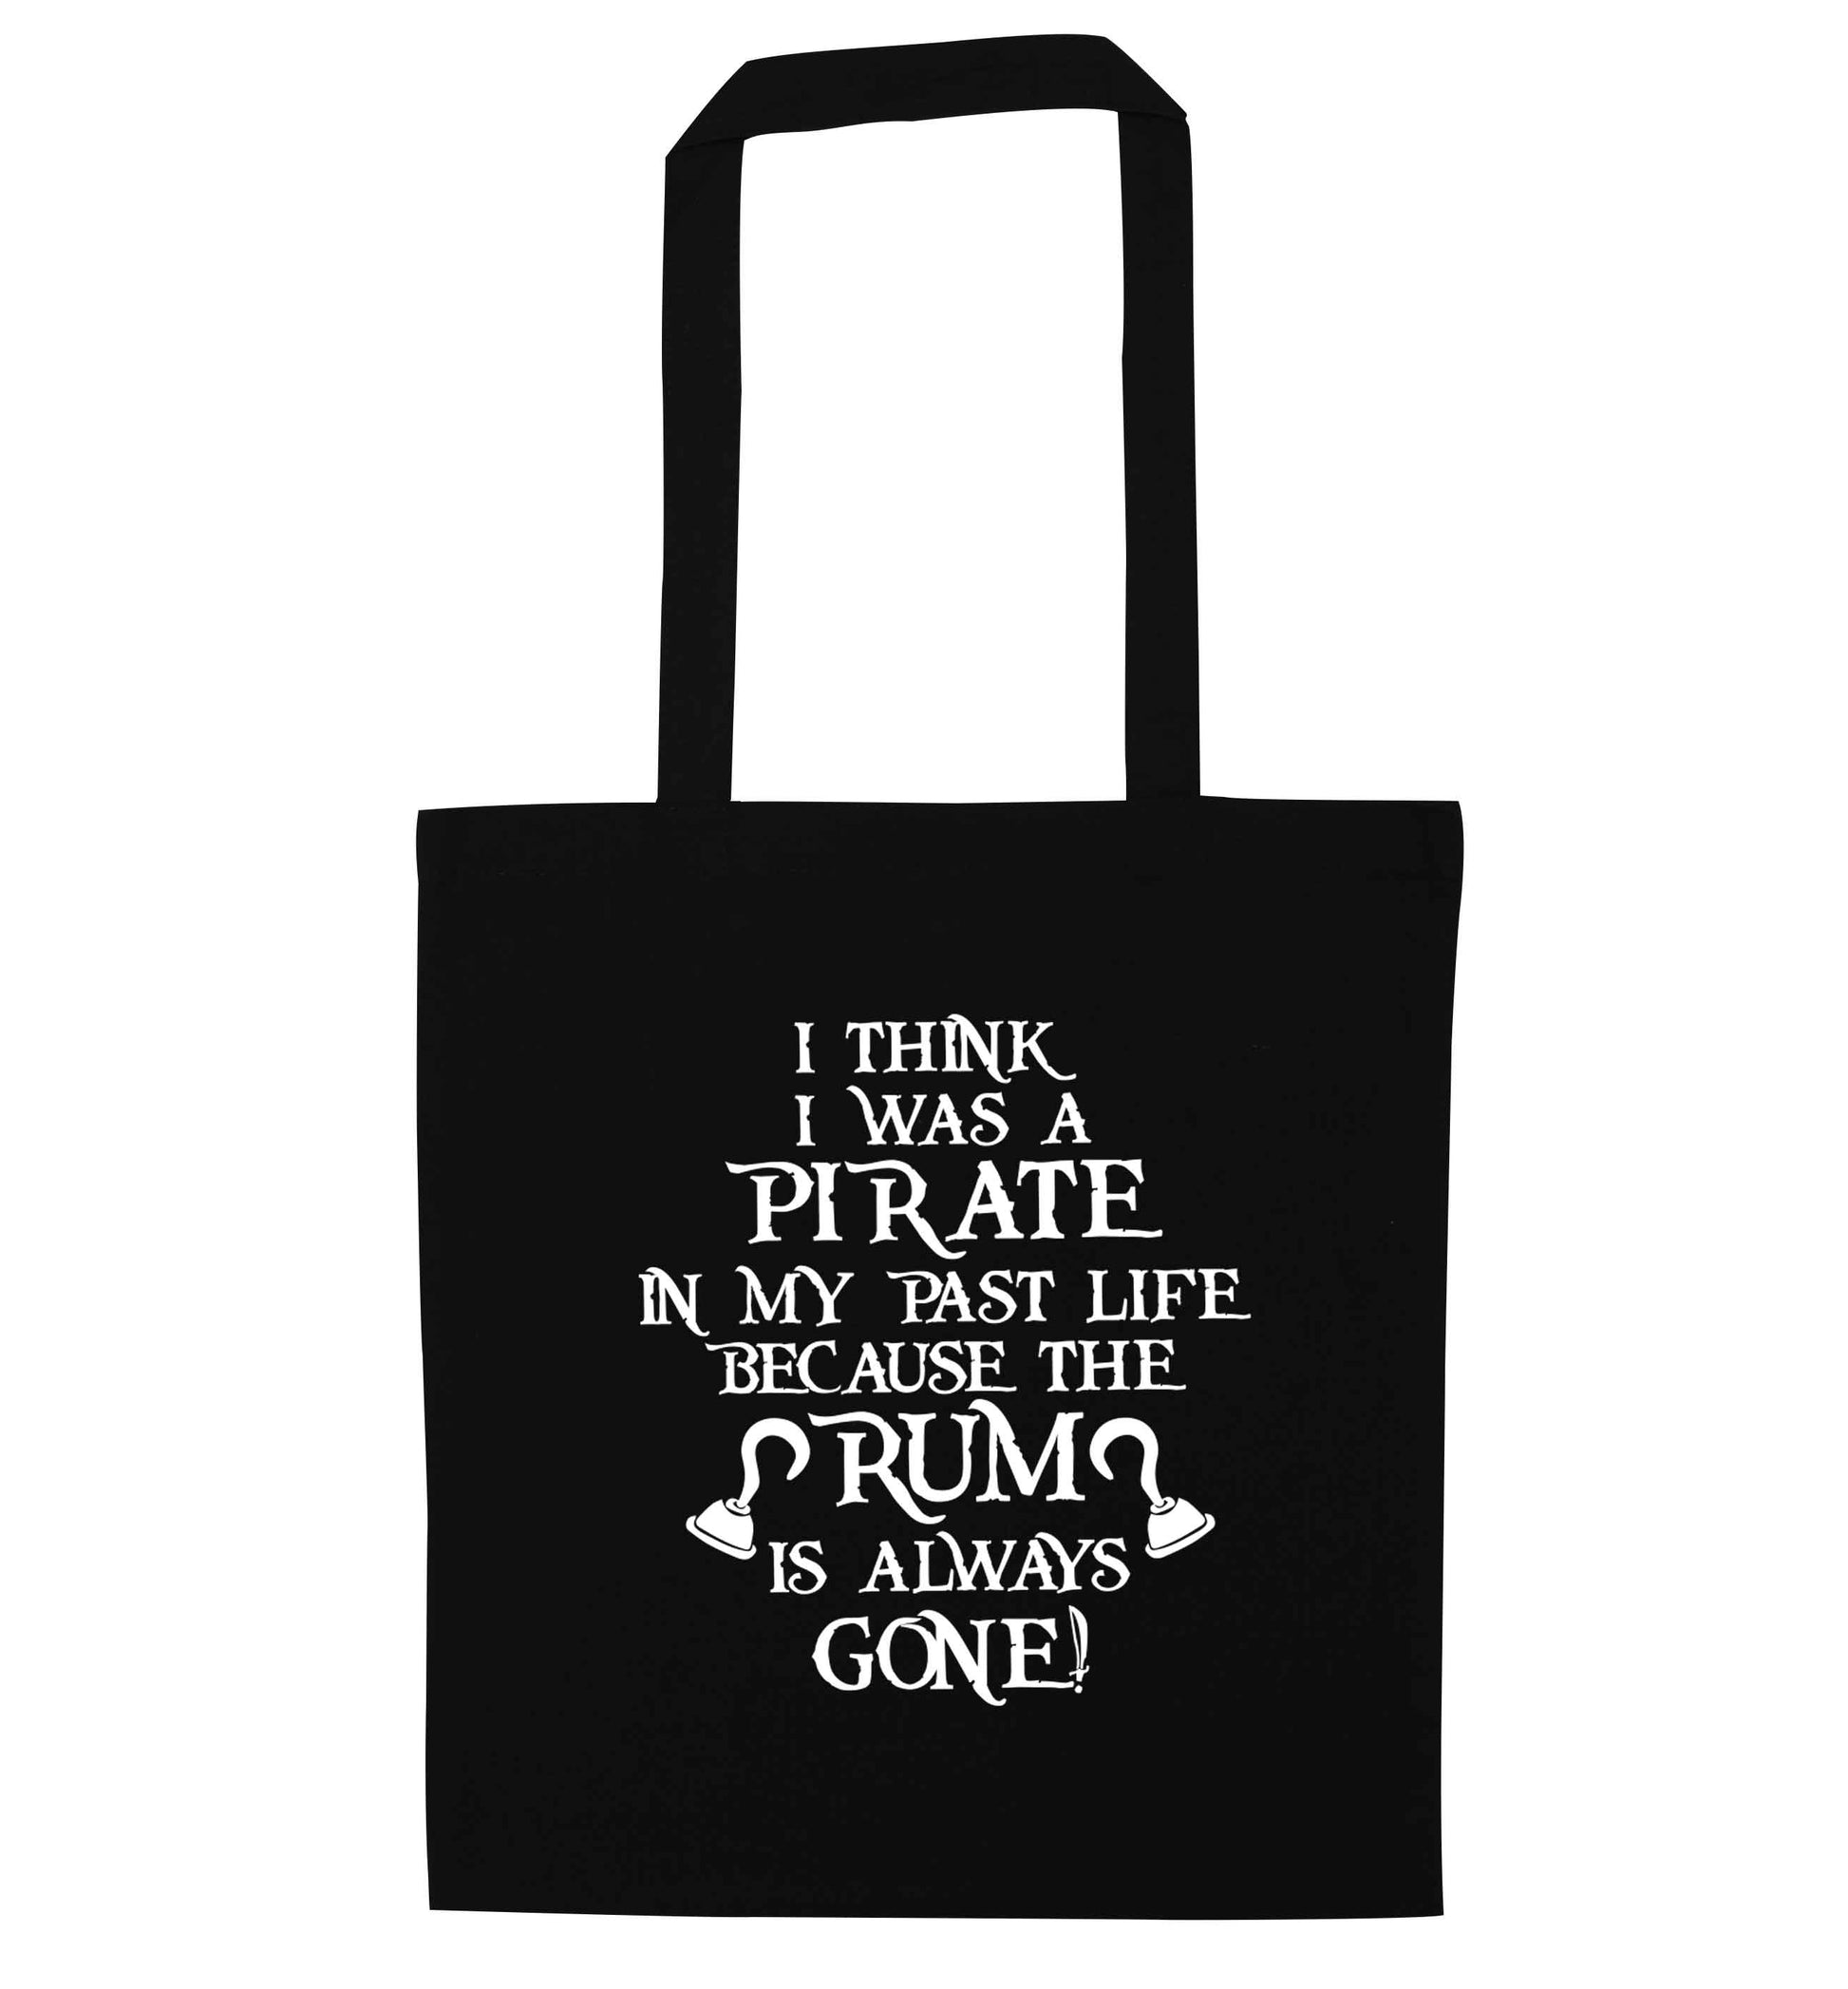 I think I was a pirate in my past life the rum is always gone black tote bag